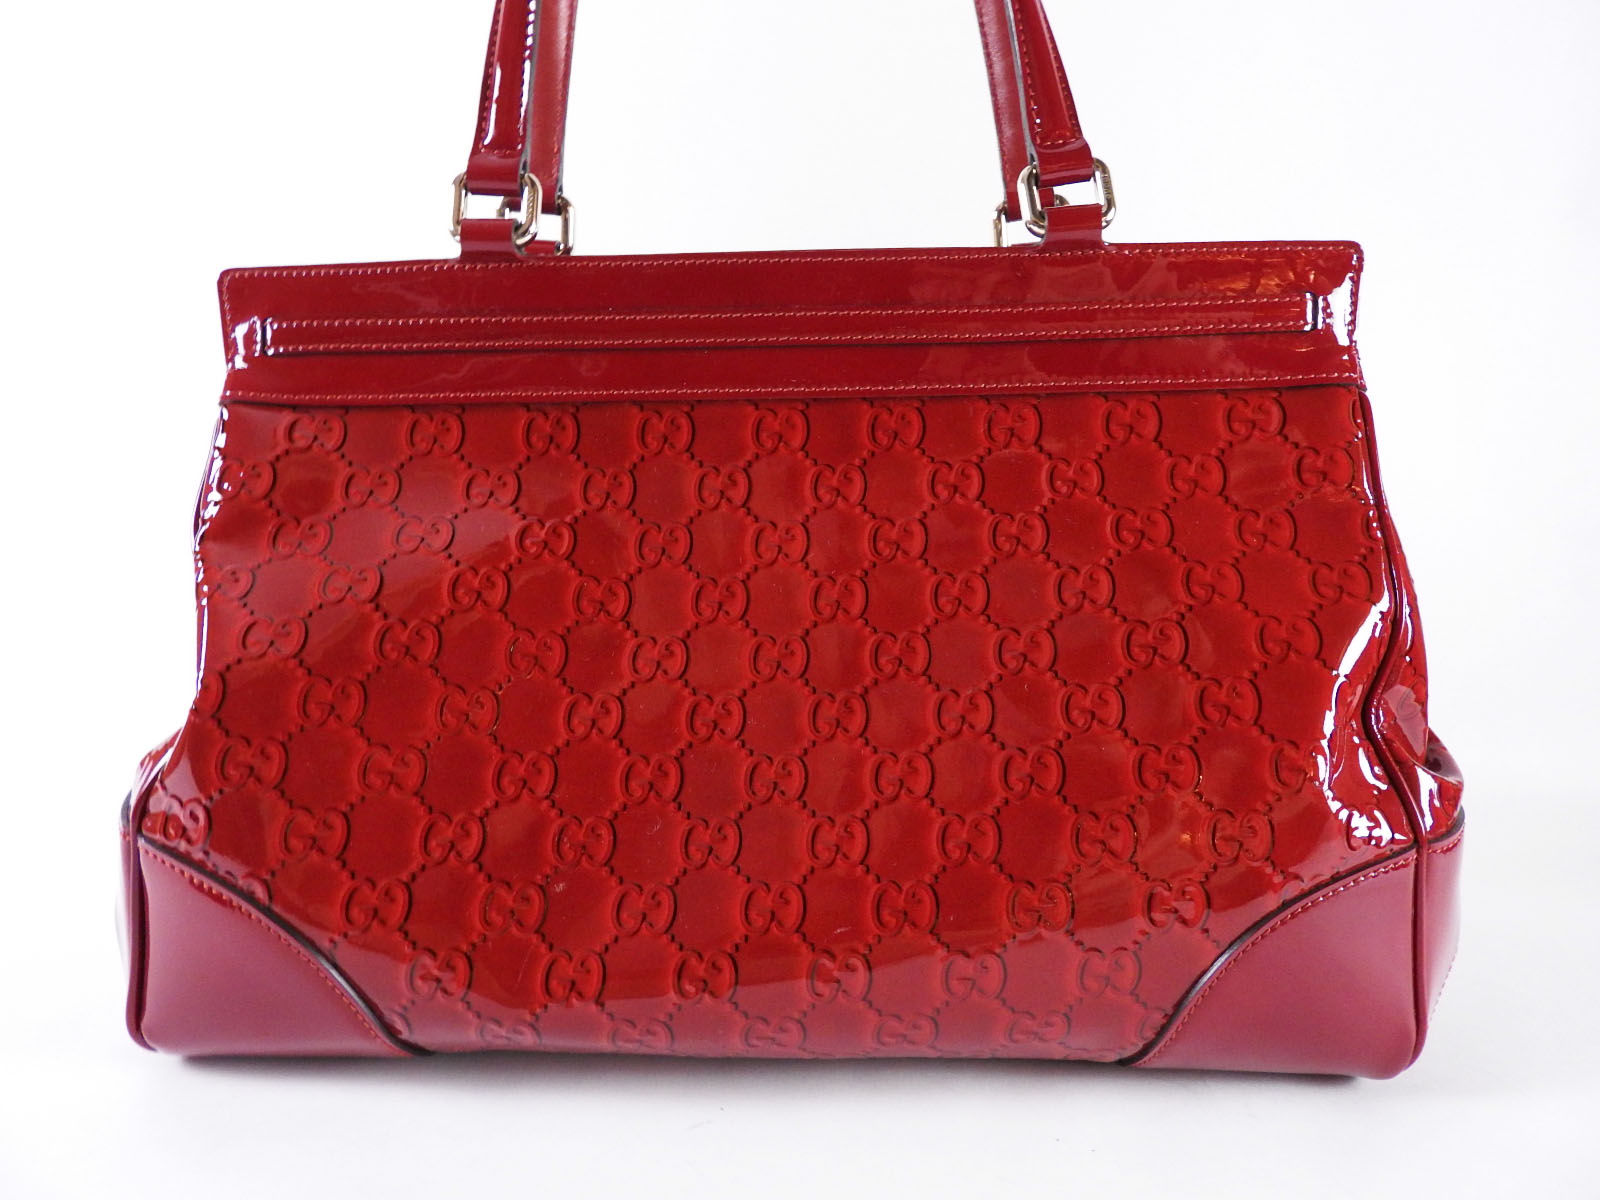 Auth GUCCI Mayfair Guccissima Tote Bag Enamel Leather Shiny Red 257612 ...